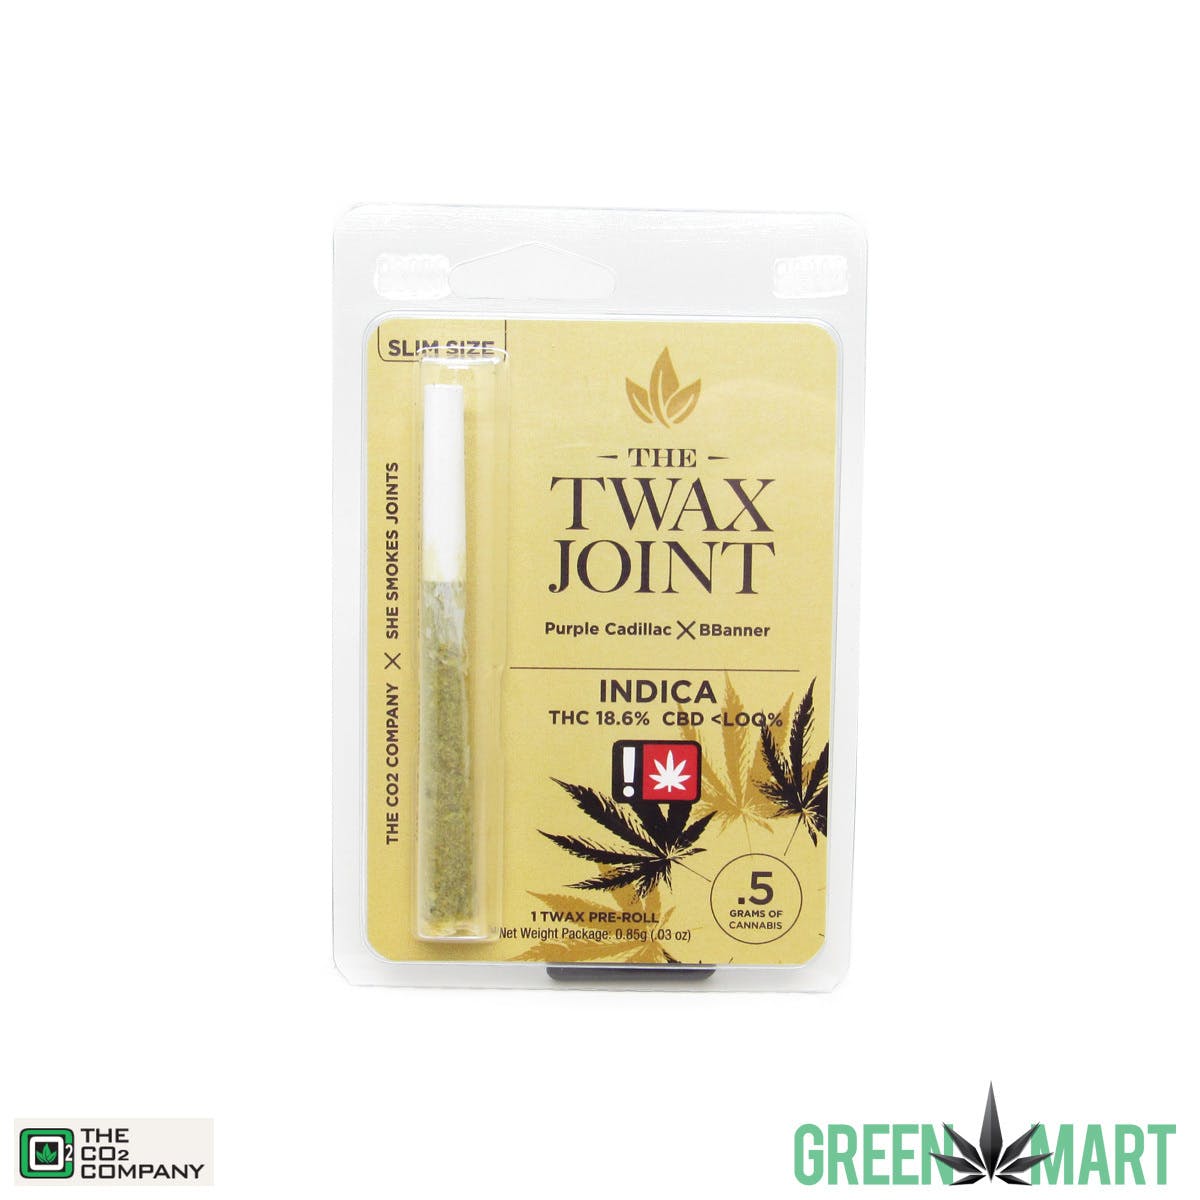 Twax Joints (Indica) Purple Cadillac x BBanner